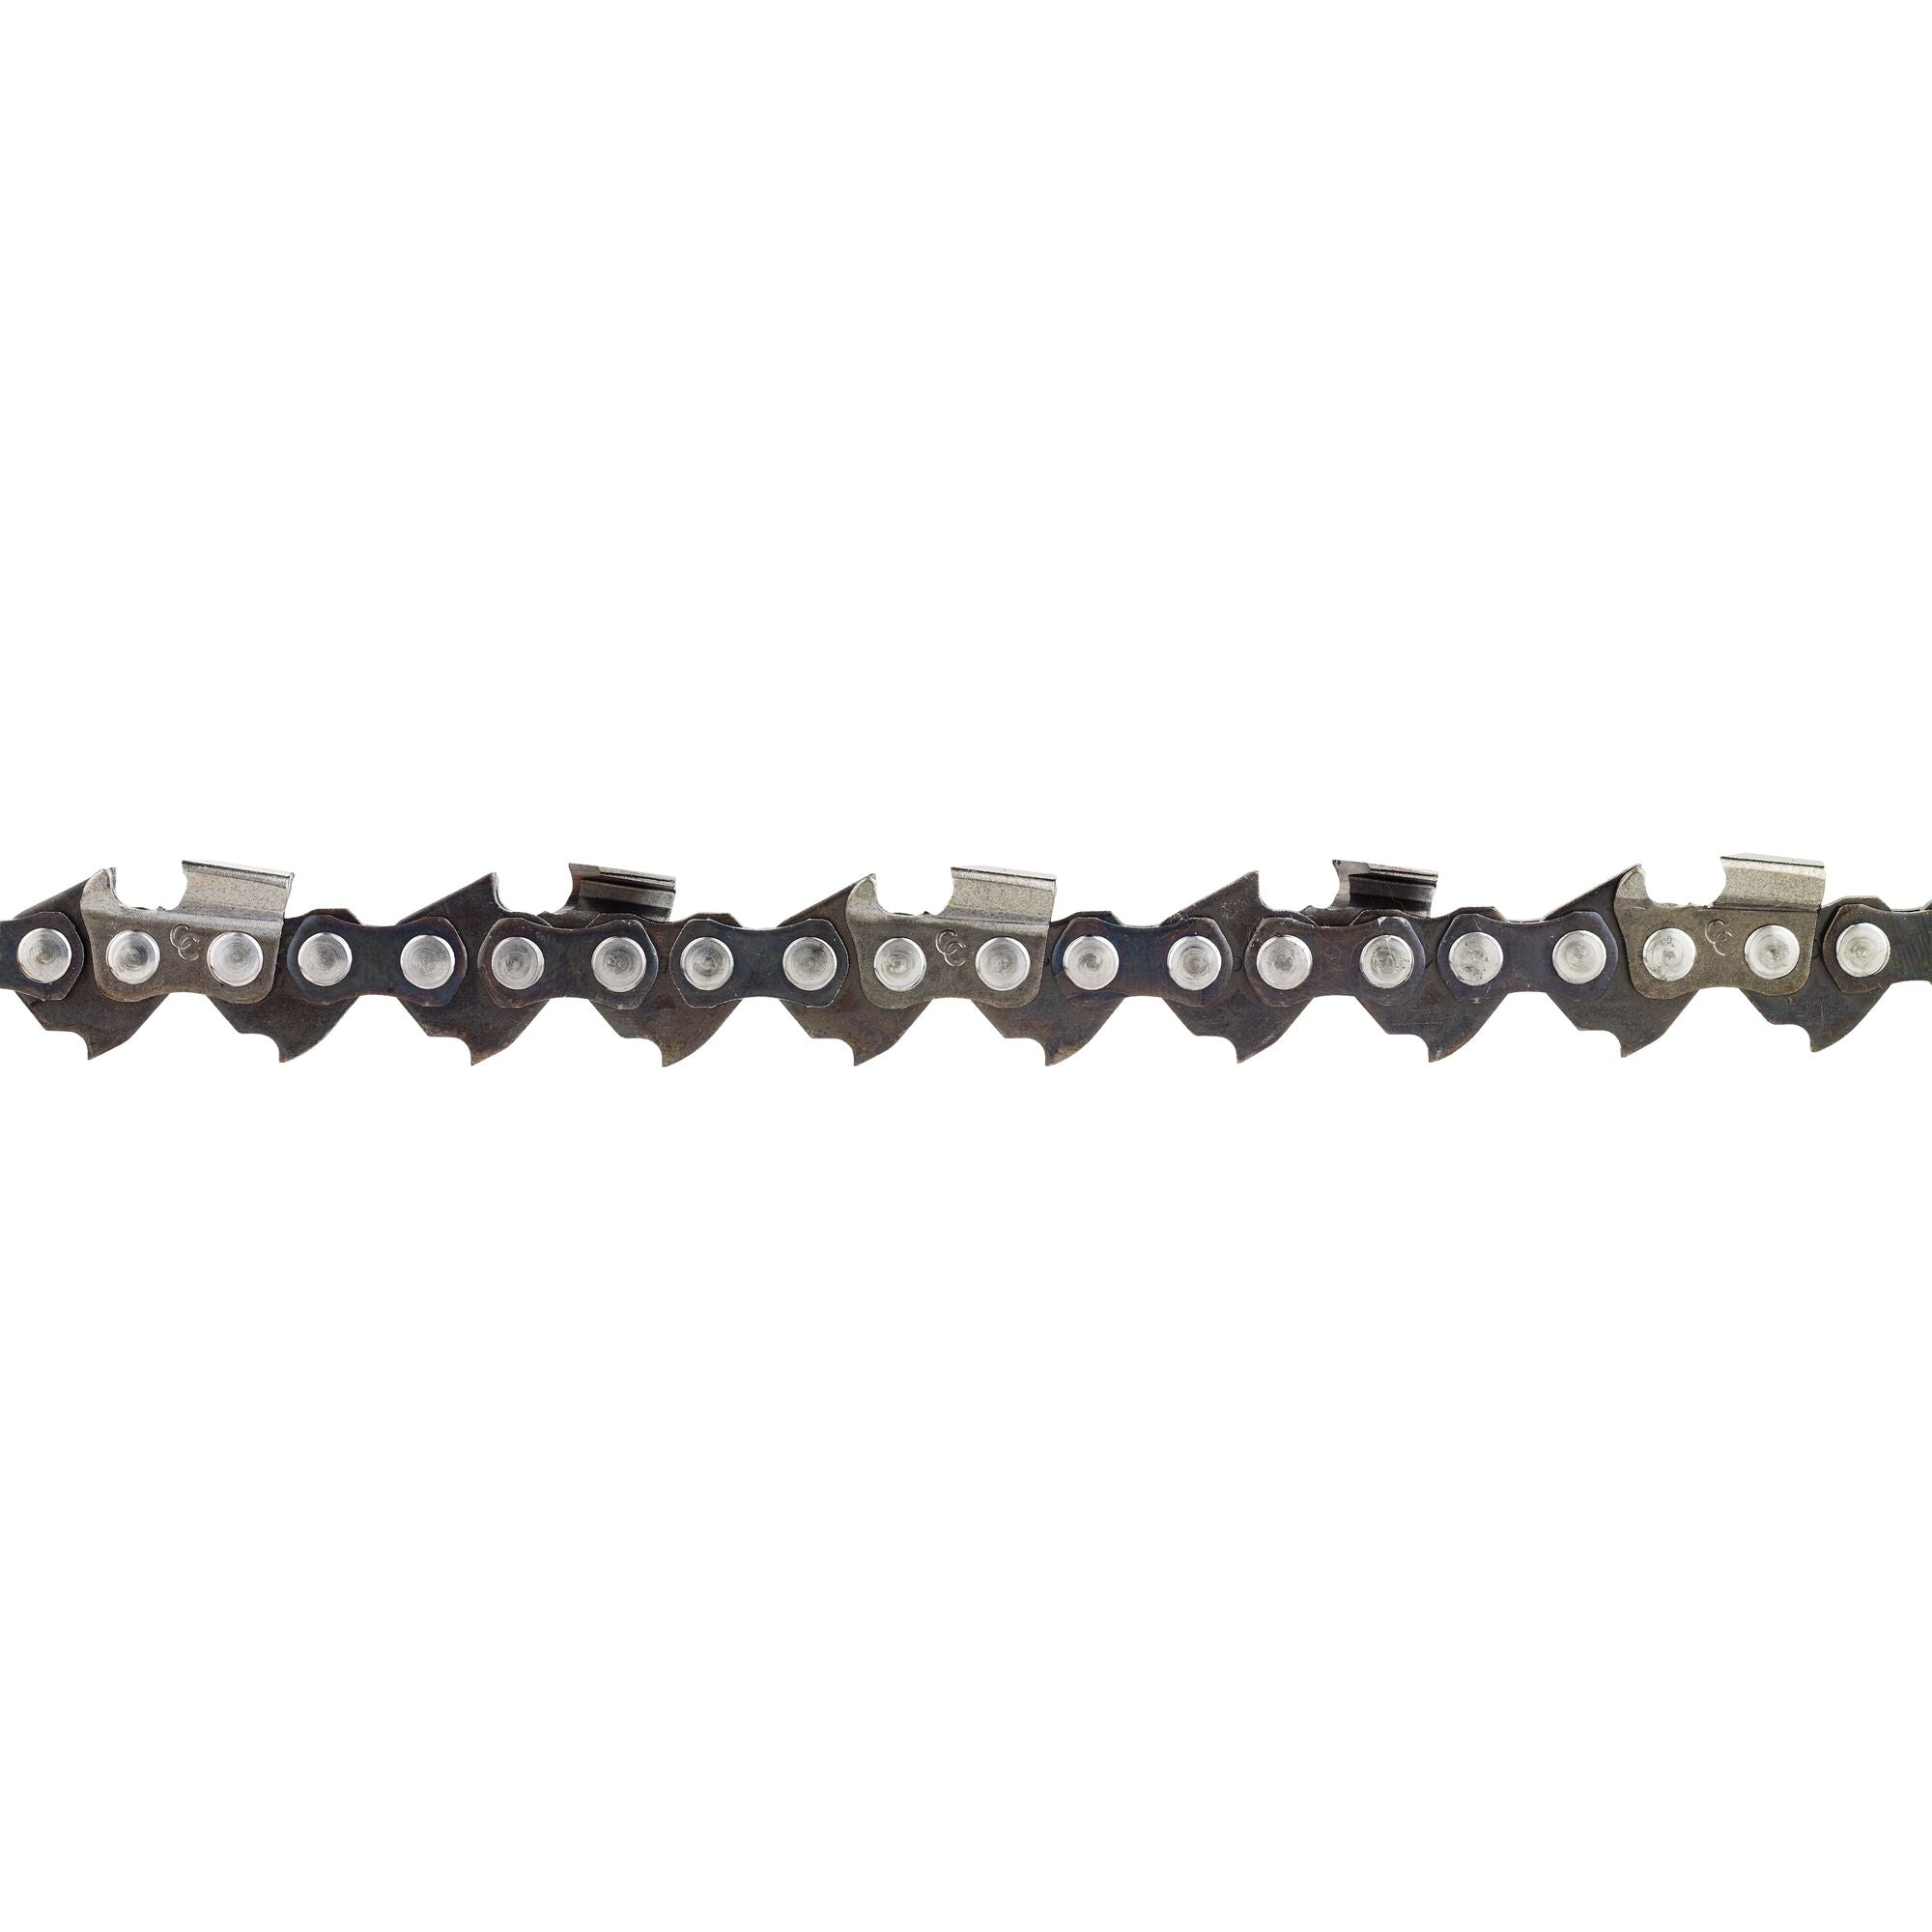 8-Inch Saw Chain For Ccs818 And Npp2018